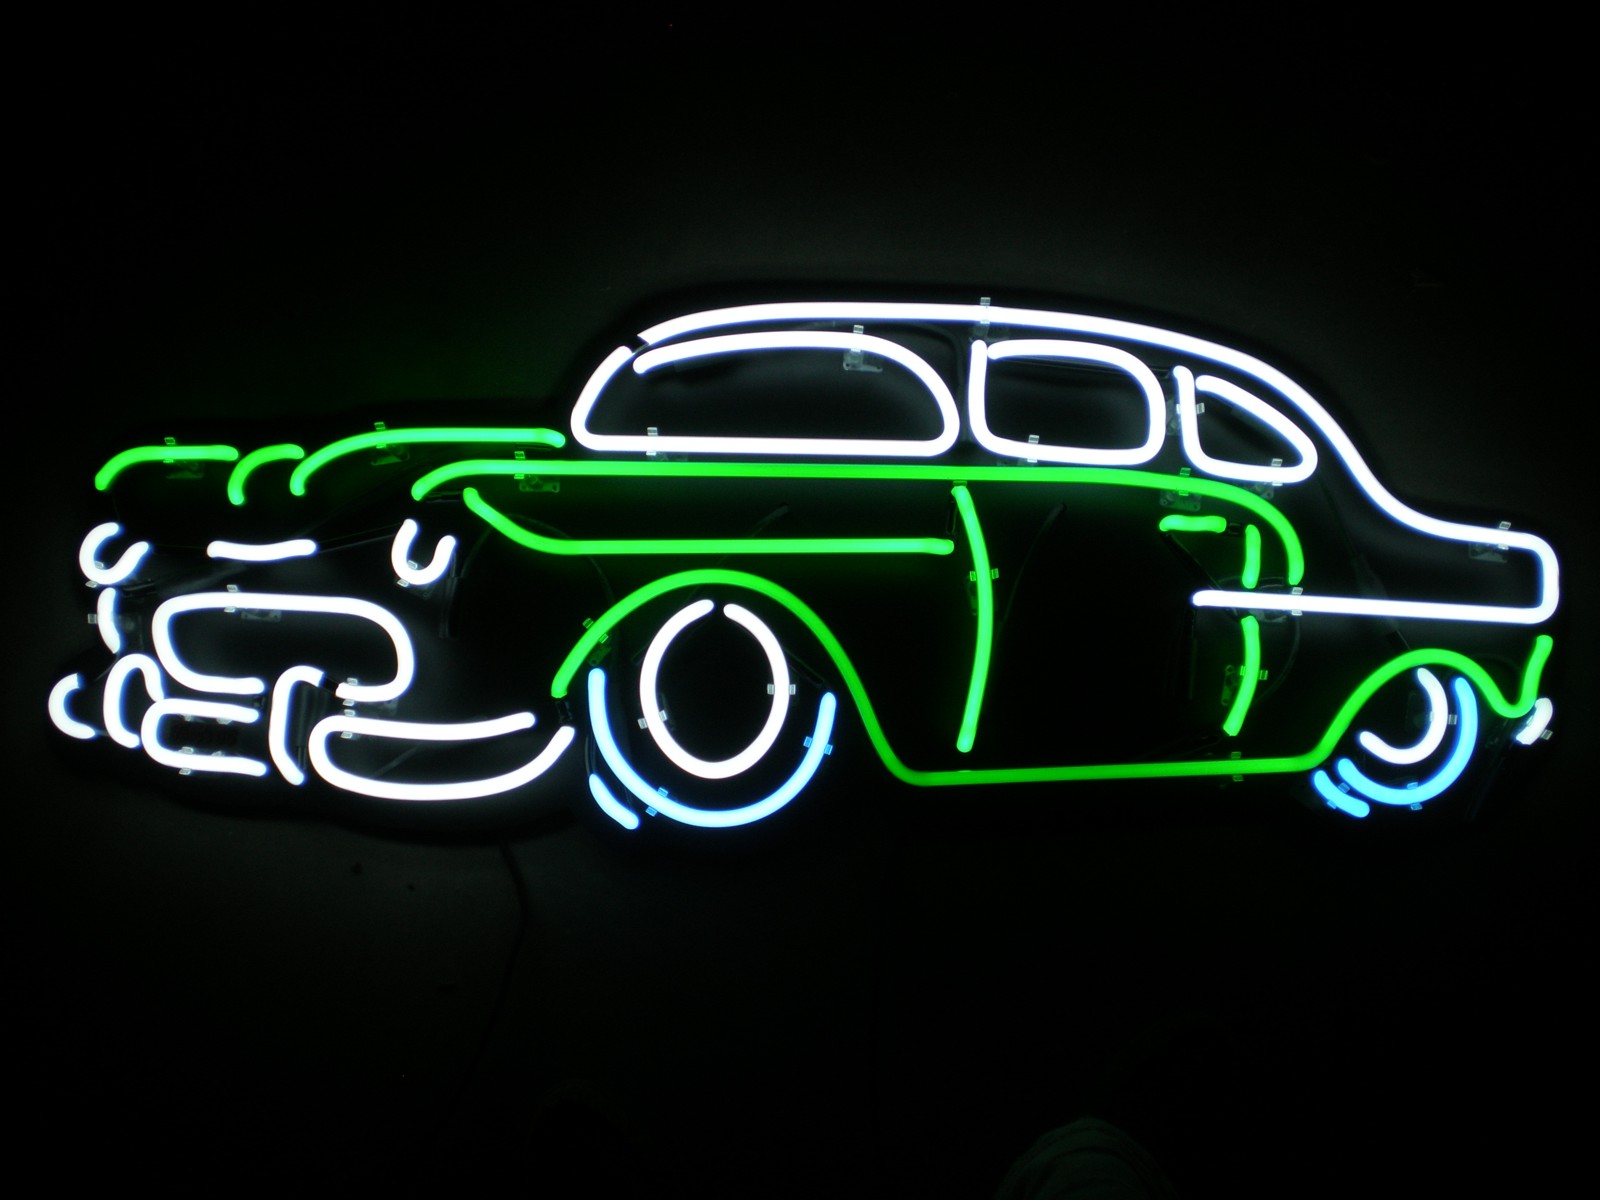 cool neon pictures in hd